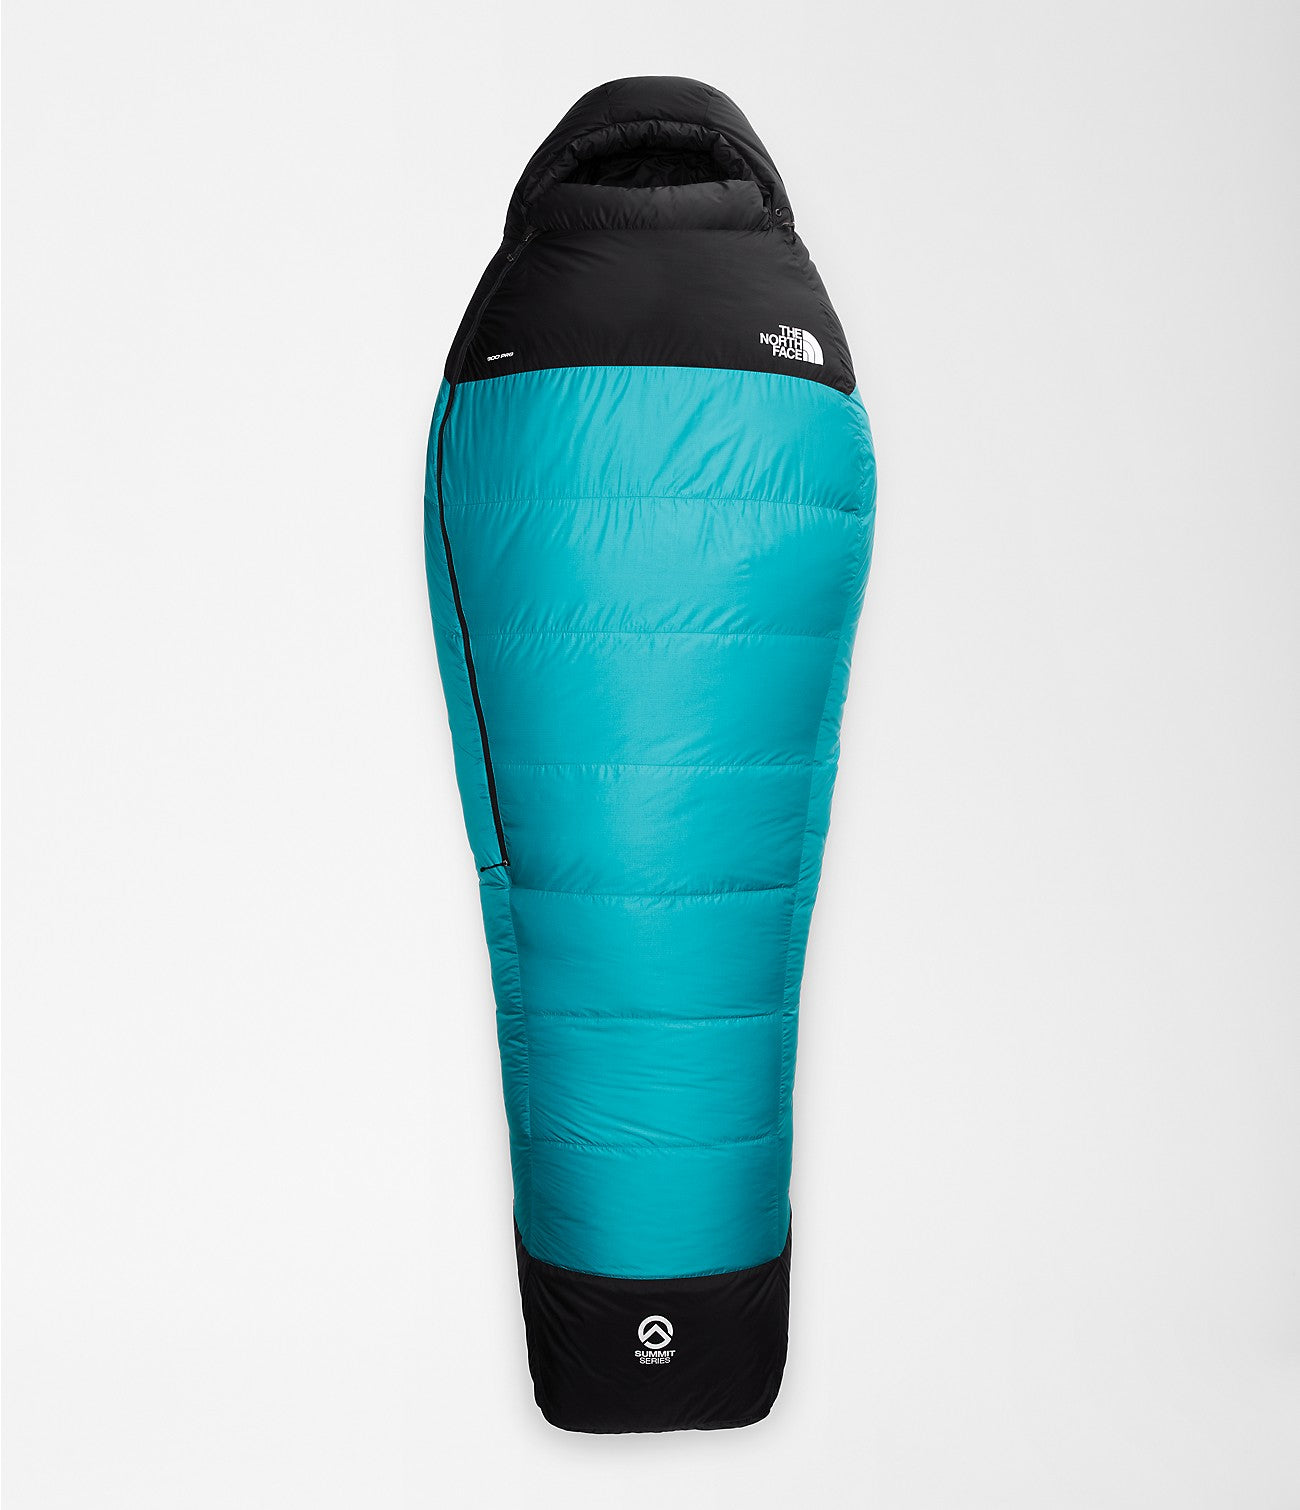 The North Face Inferno 15F/-9C Sleeping Bag